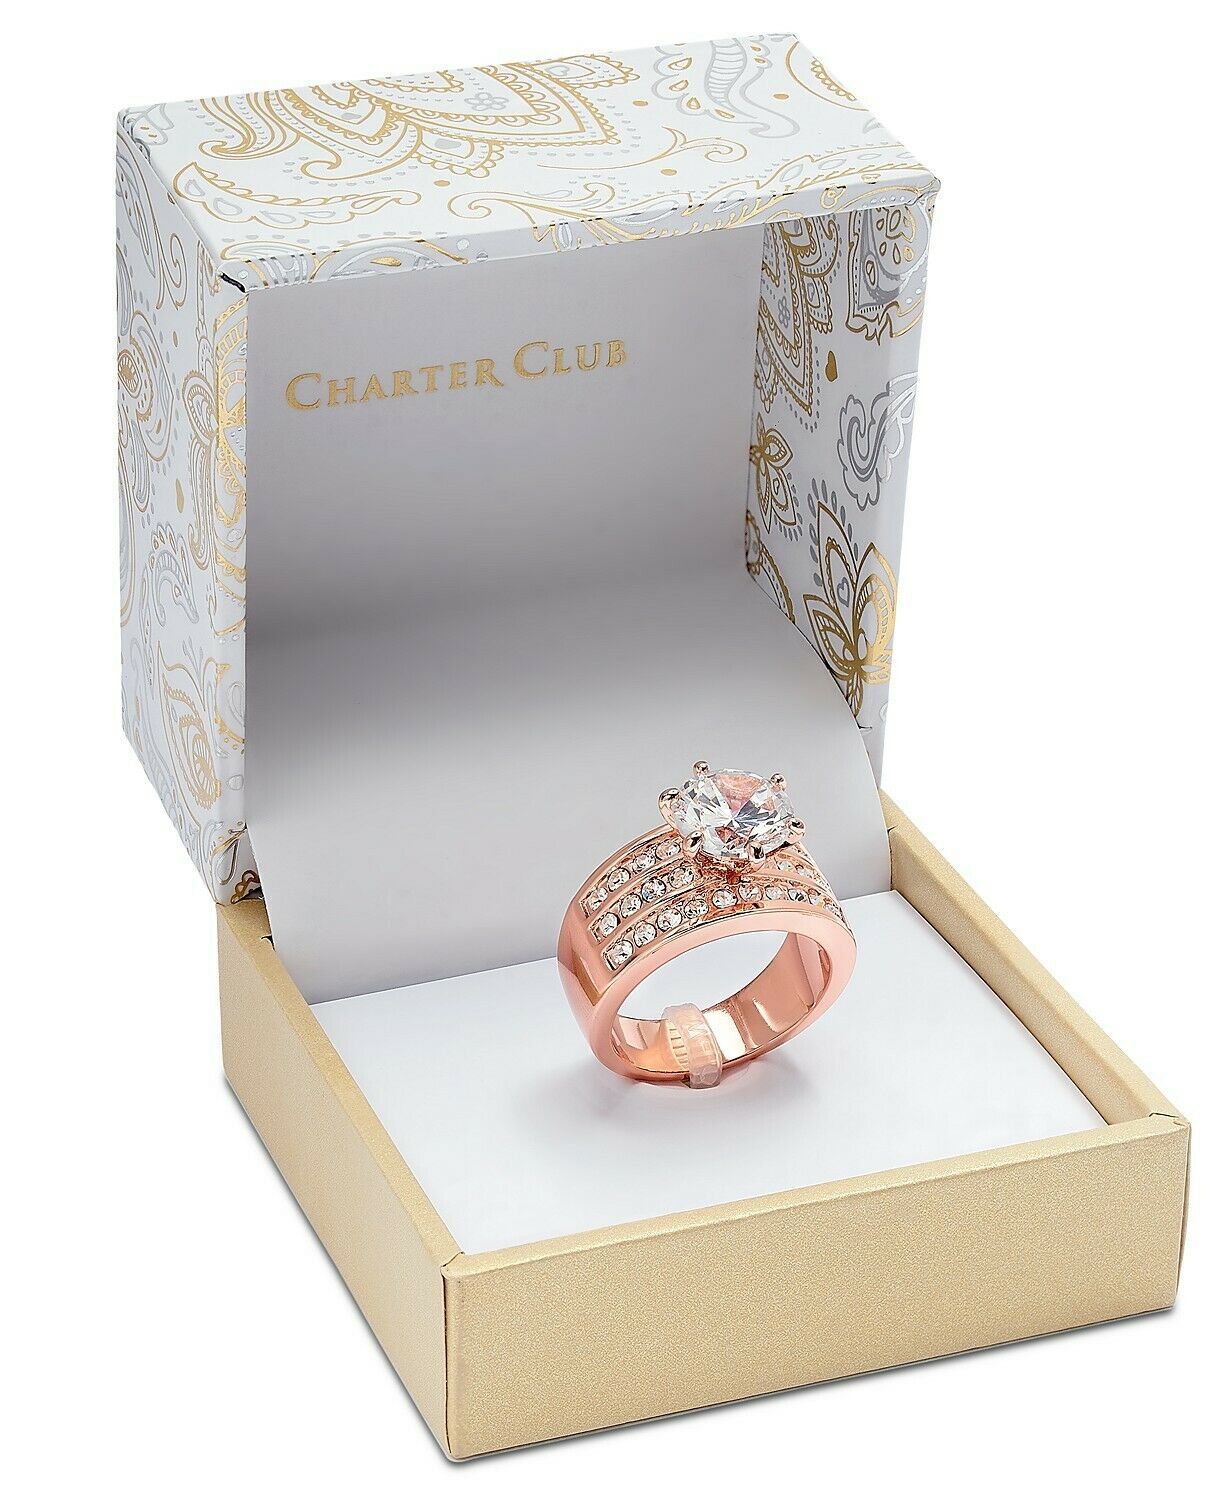 Primary image for Charter Club Women's Rose Gold-Tone Crystal Triple-Row Ring In Gift Box Size 5